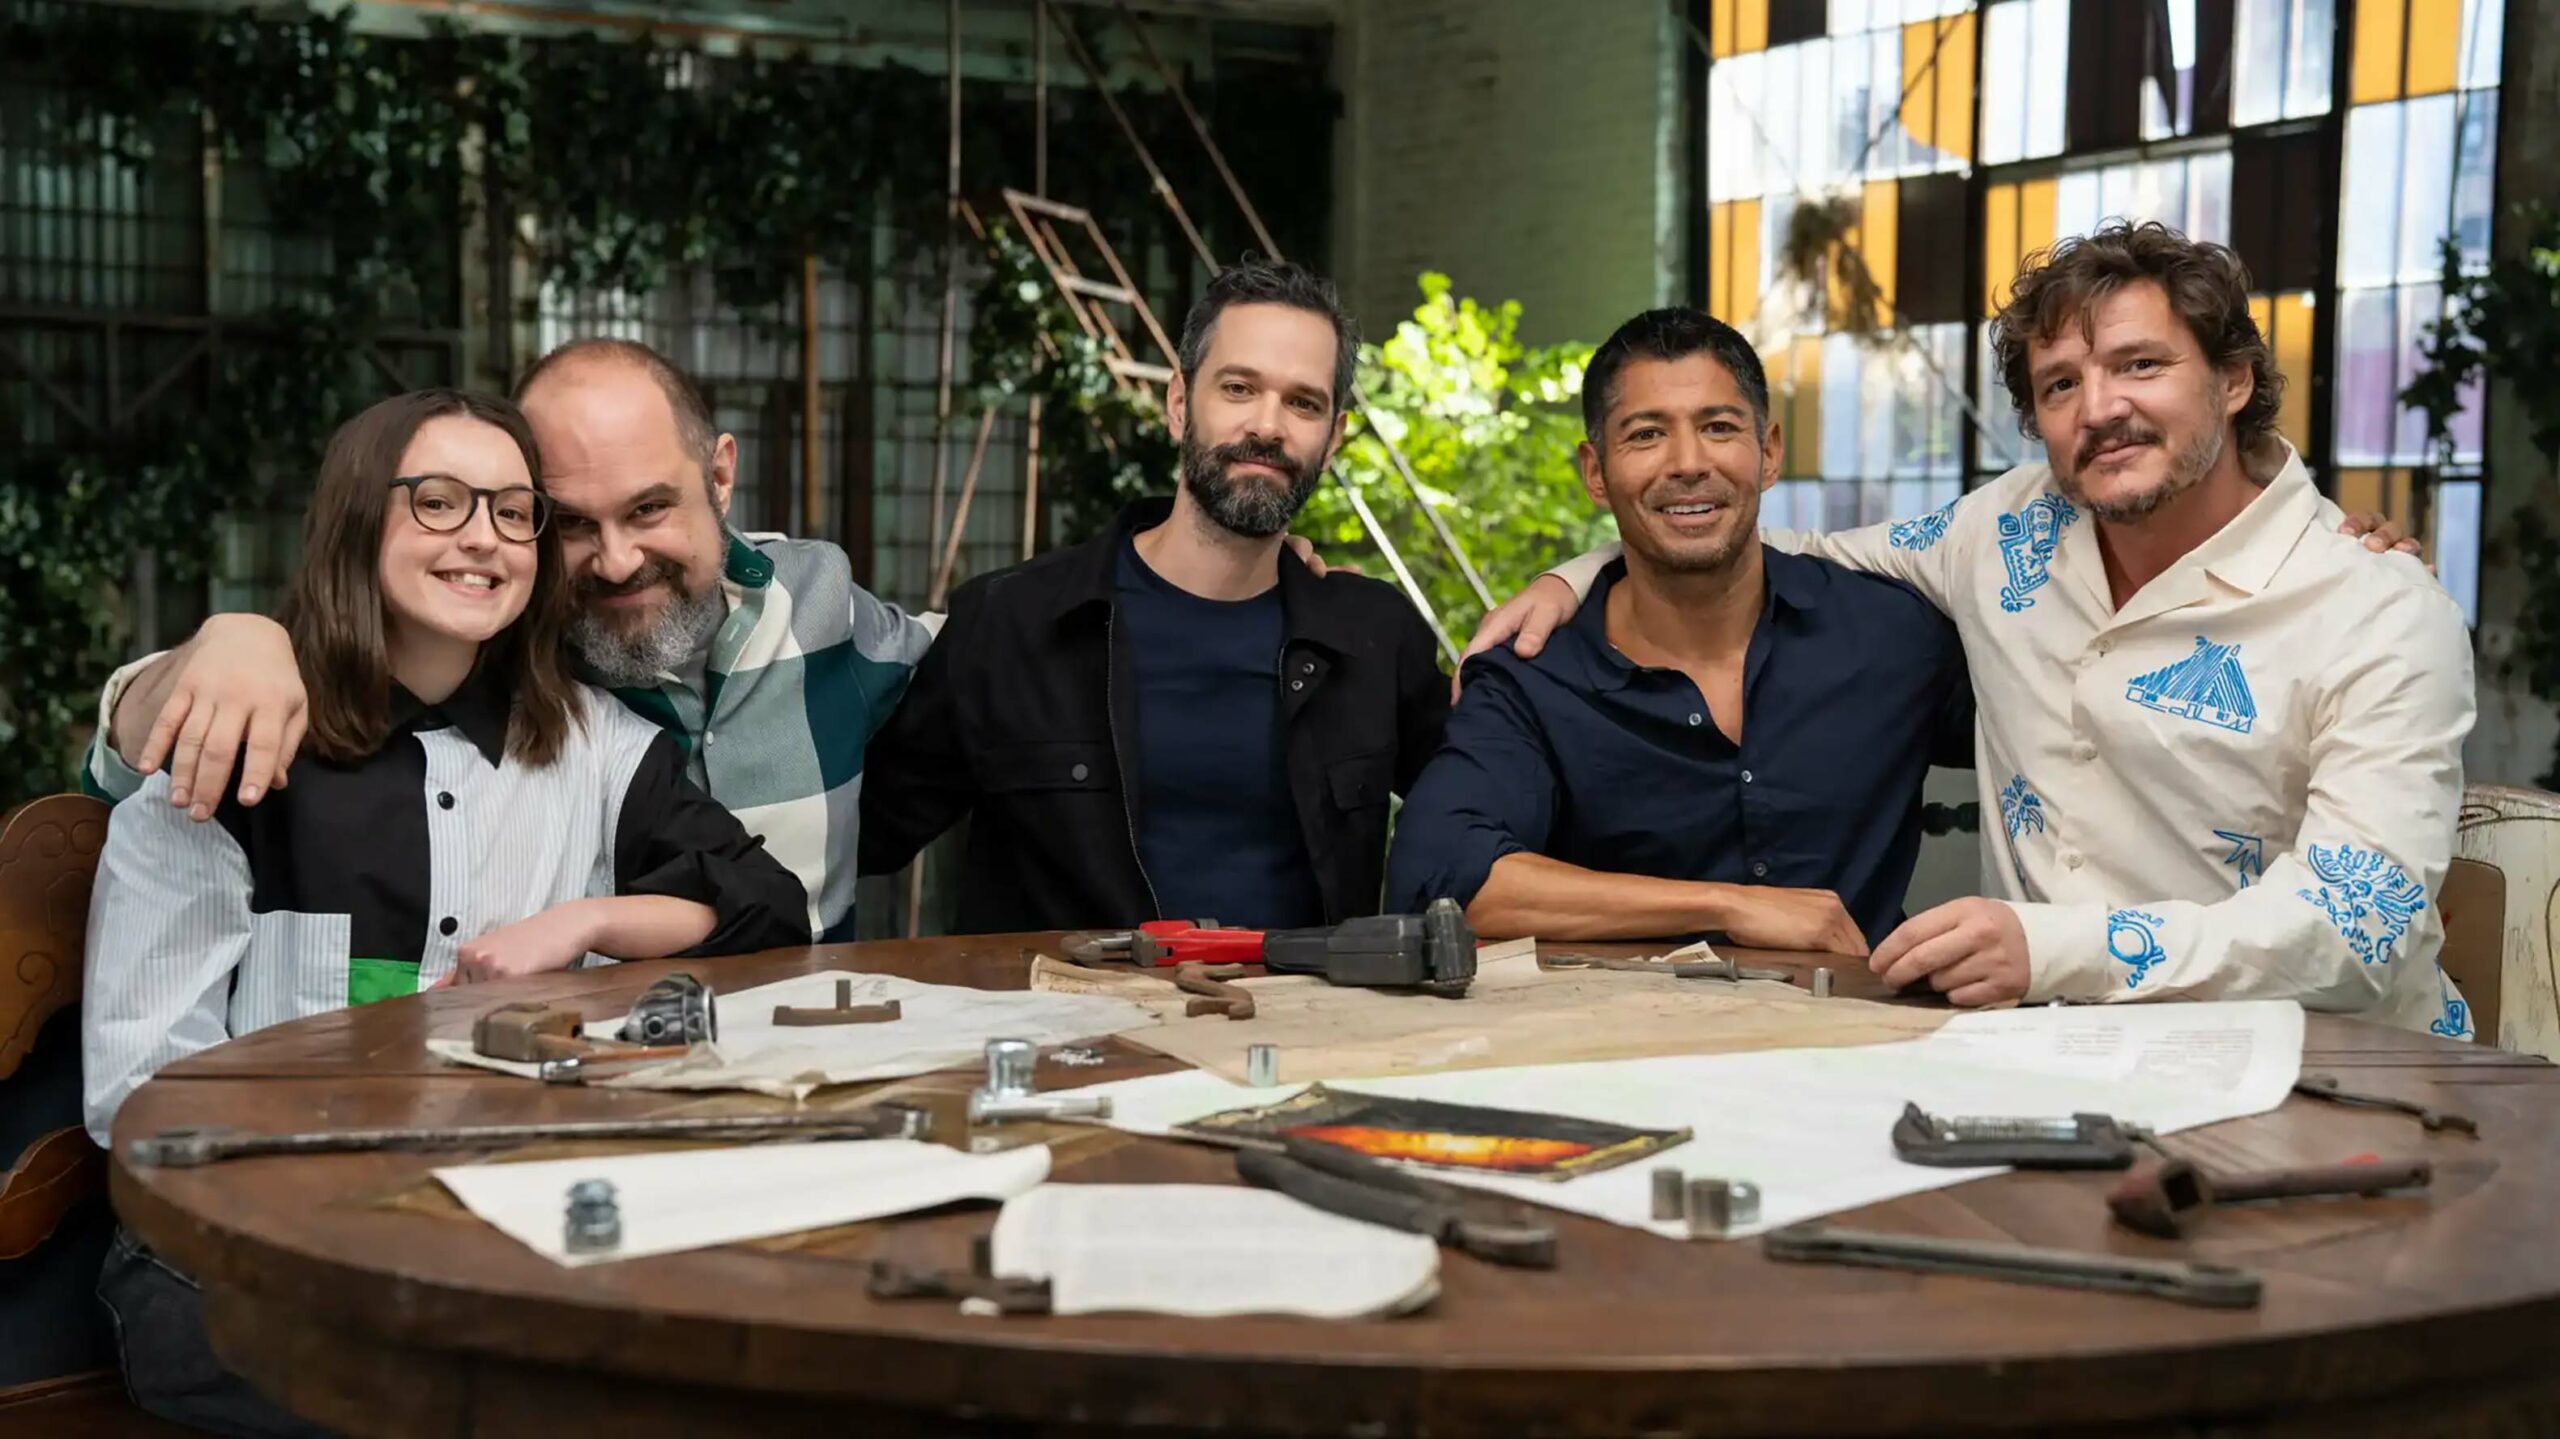 The Last of Us Bella Ramsey, Craig Mazin, Neil Druckmann, Asad Qizilbash and Pedro Pascal sitting at a table